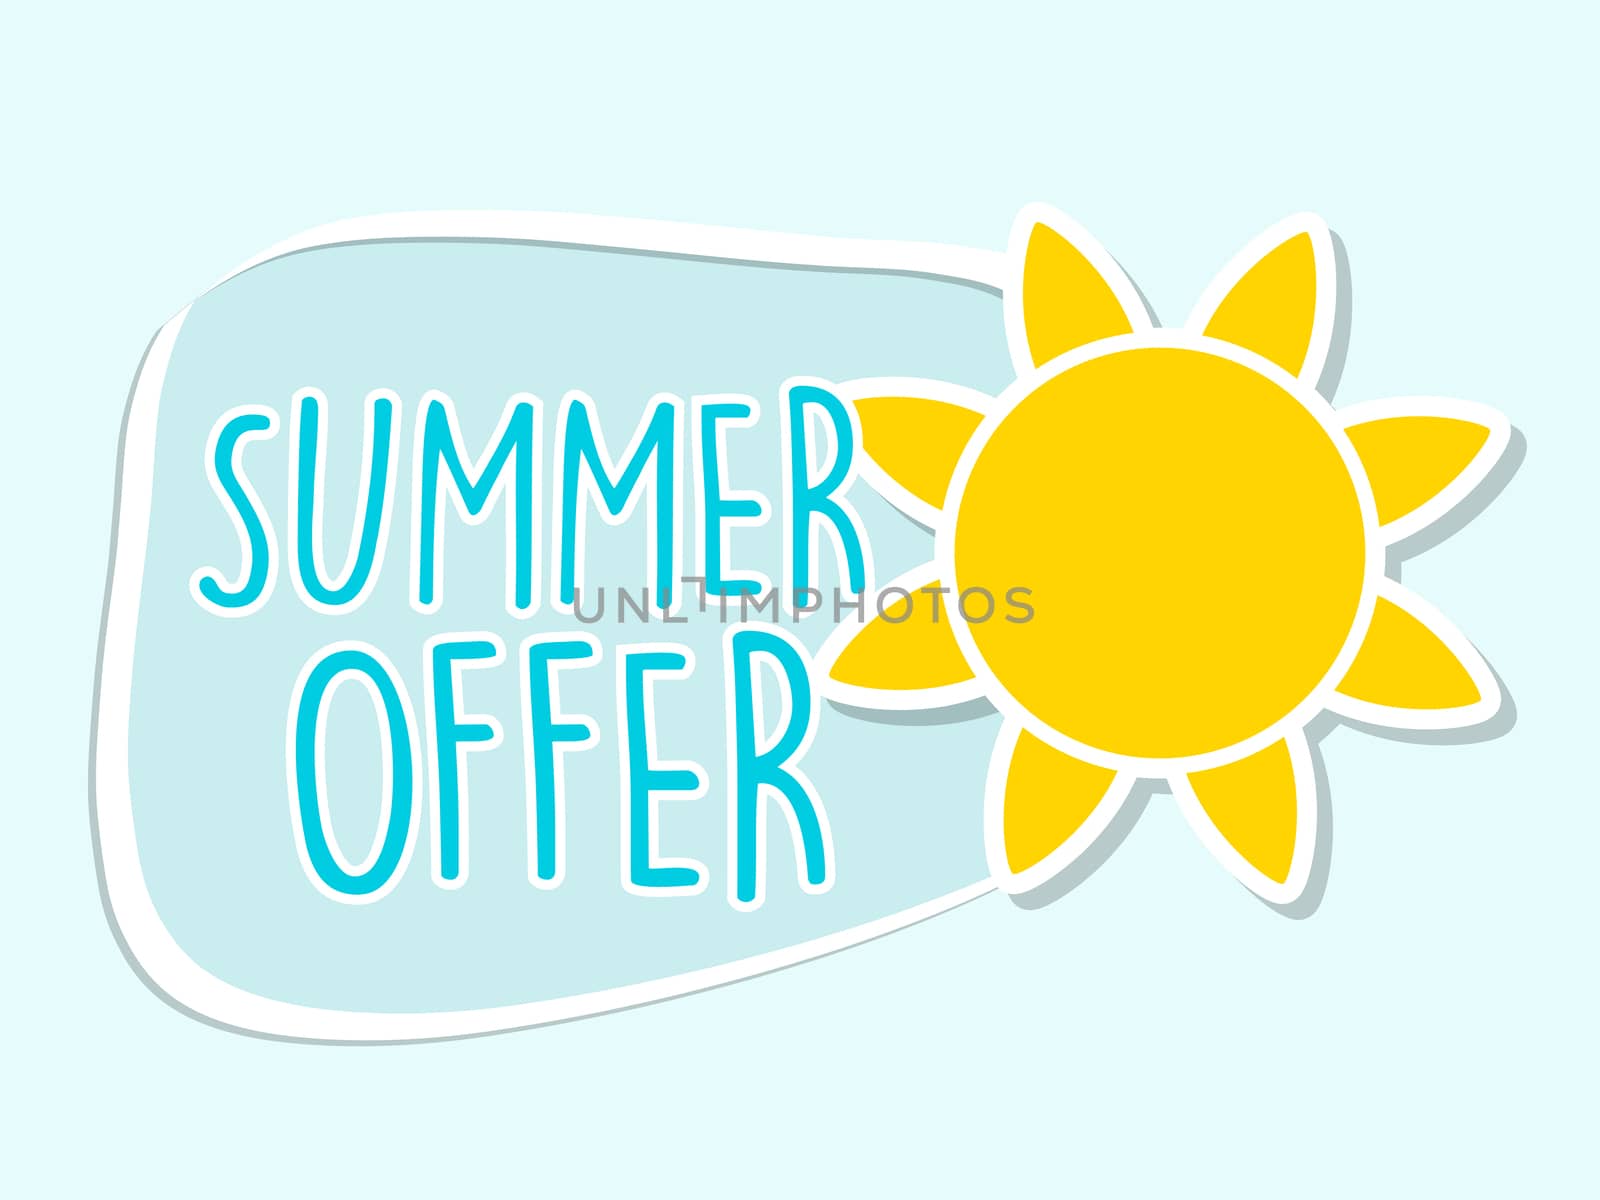 summer offer with yellow sun sign, blue flat design label by marinini